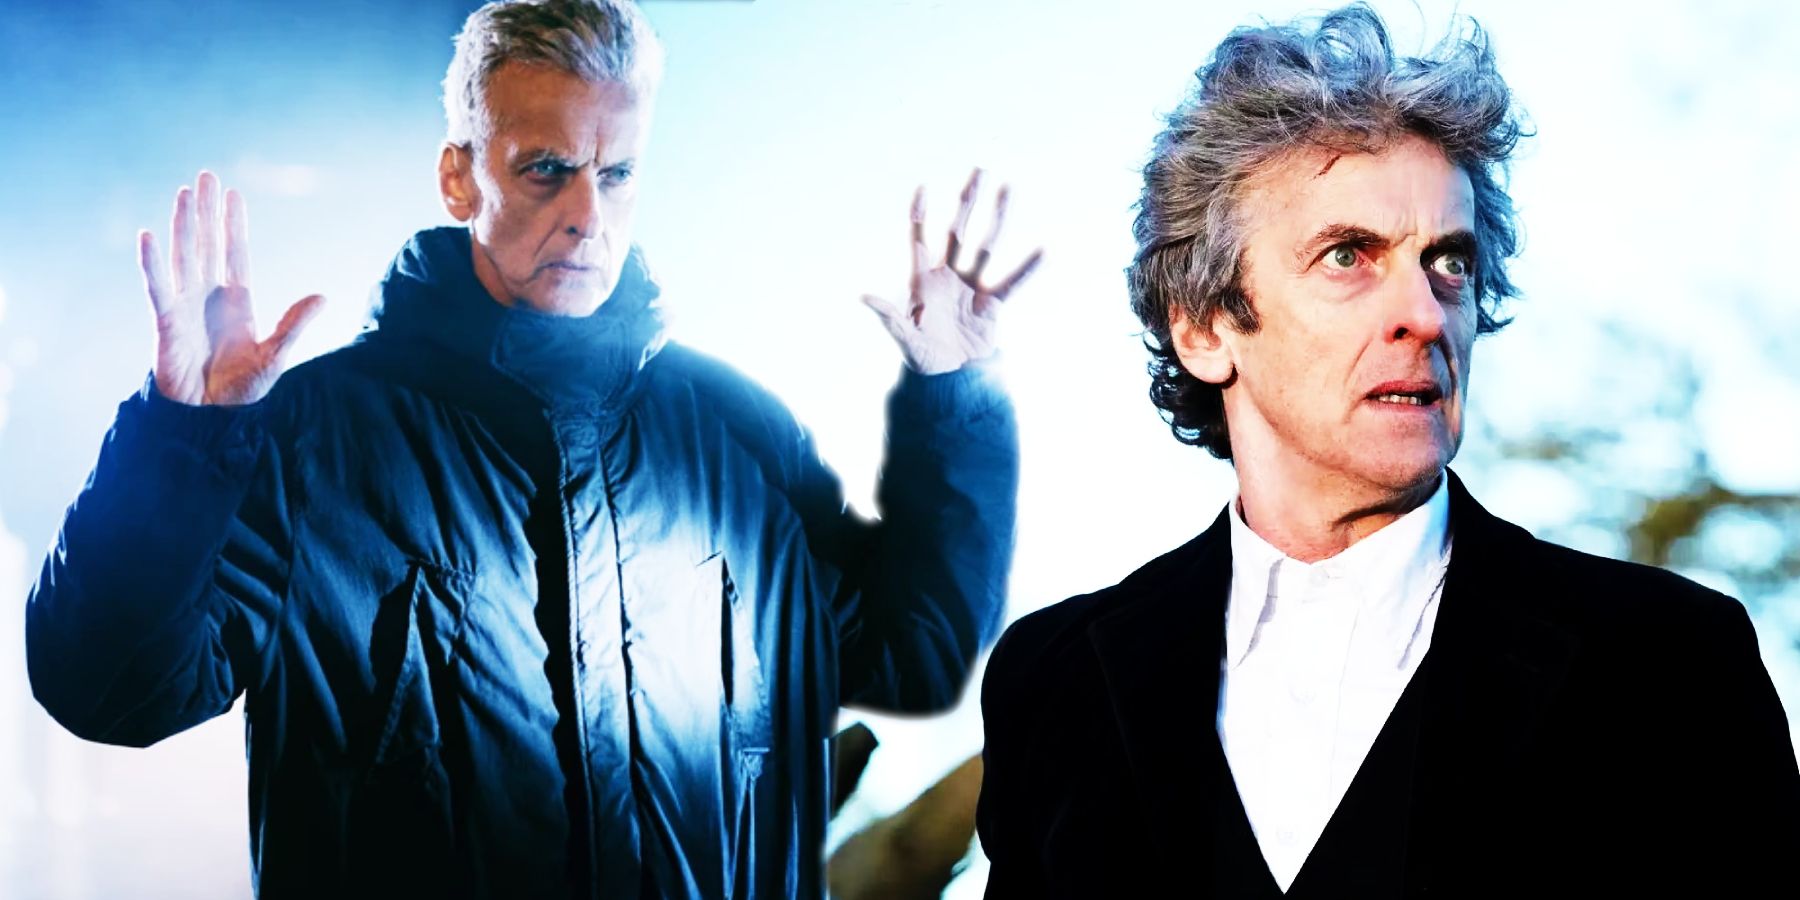 Peter Capaldi as Gideon in The Devils Hour and as the Twelfth Doctor in Doctor Who